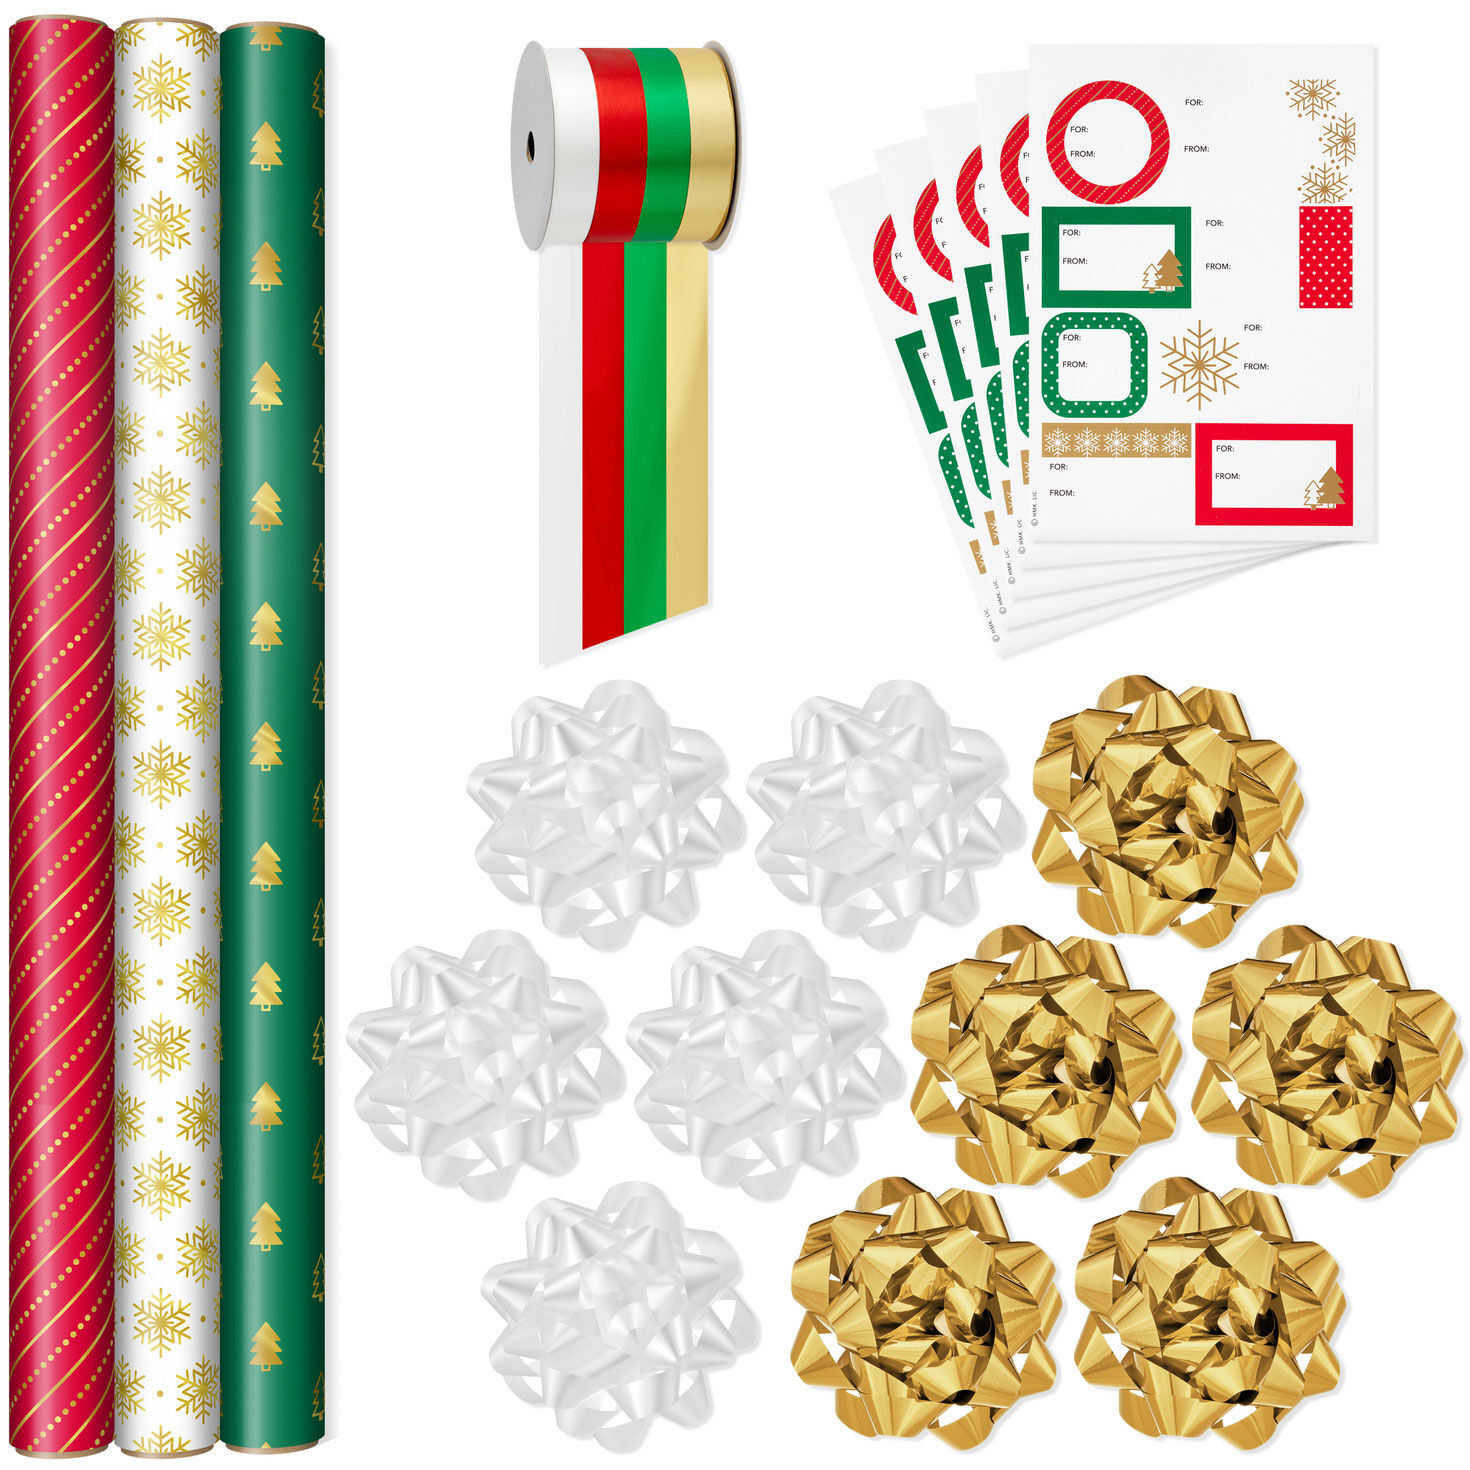 Christmas Gift Wrap Kit With Wrapping Paper, Bows, Ribbons and Tags for only USD 29.99 | Hallmark